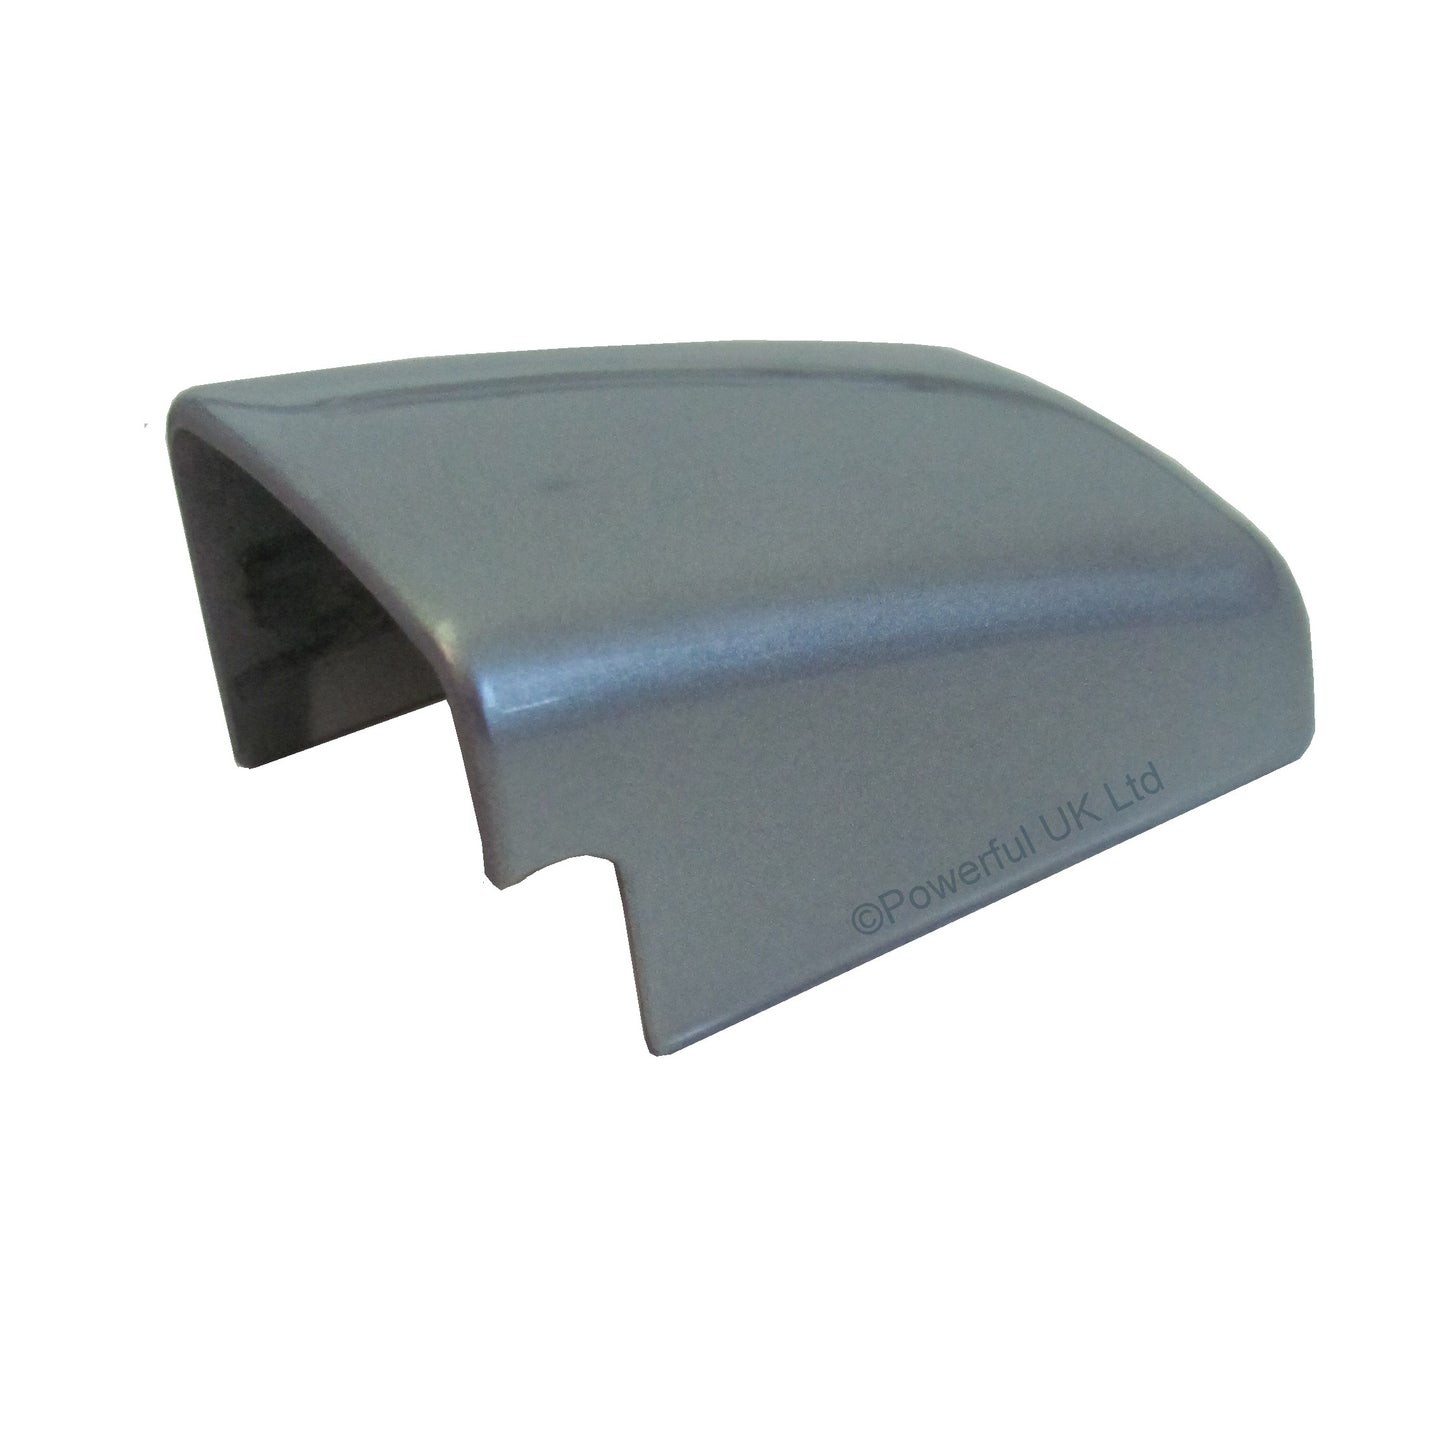 Door Handle Covers for Land Rover Freelander 2 fitted with 1 pc Handles  - Zambezi Silver